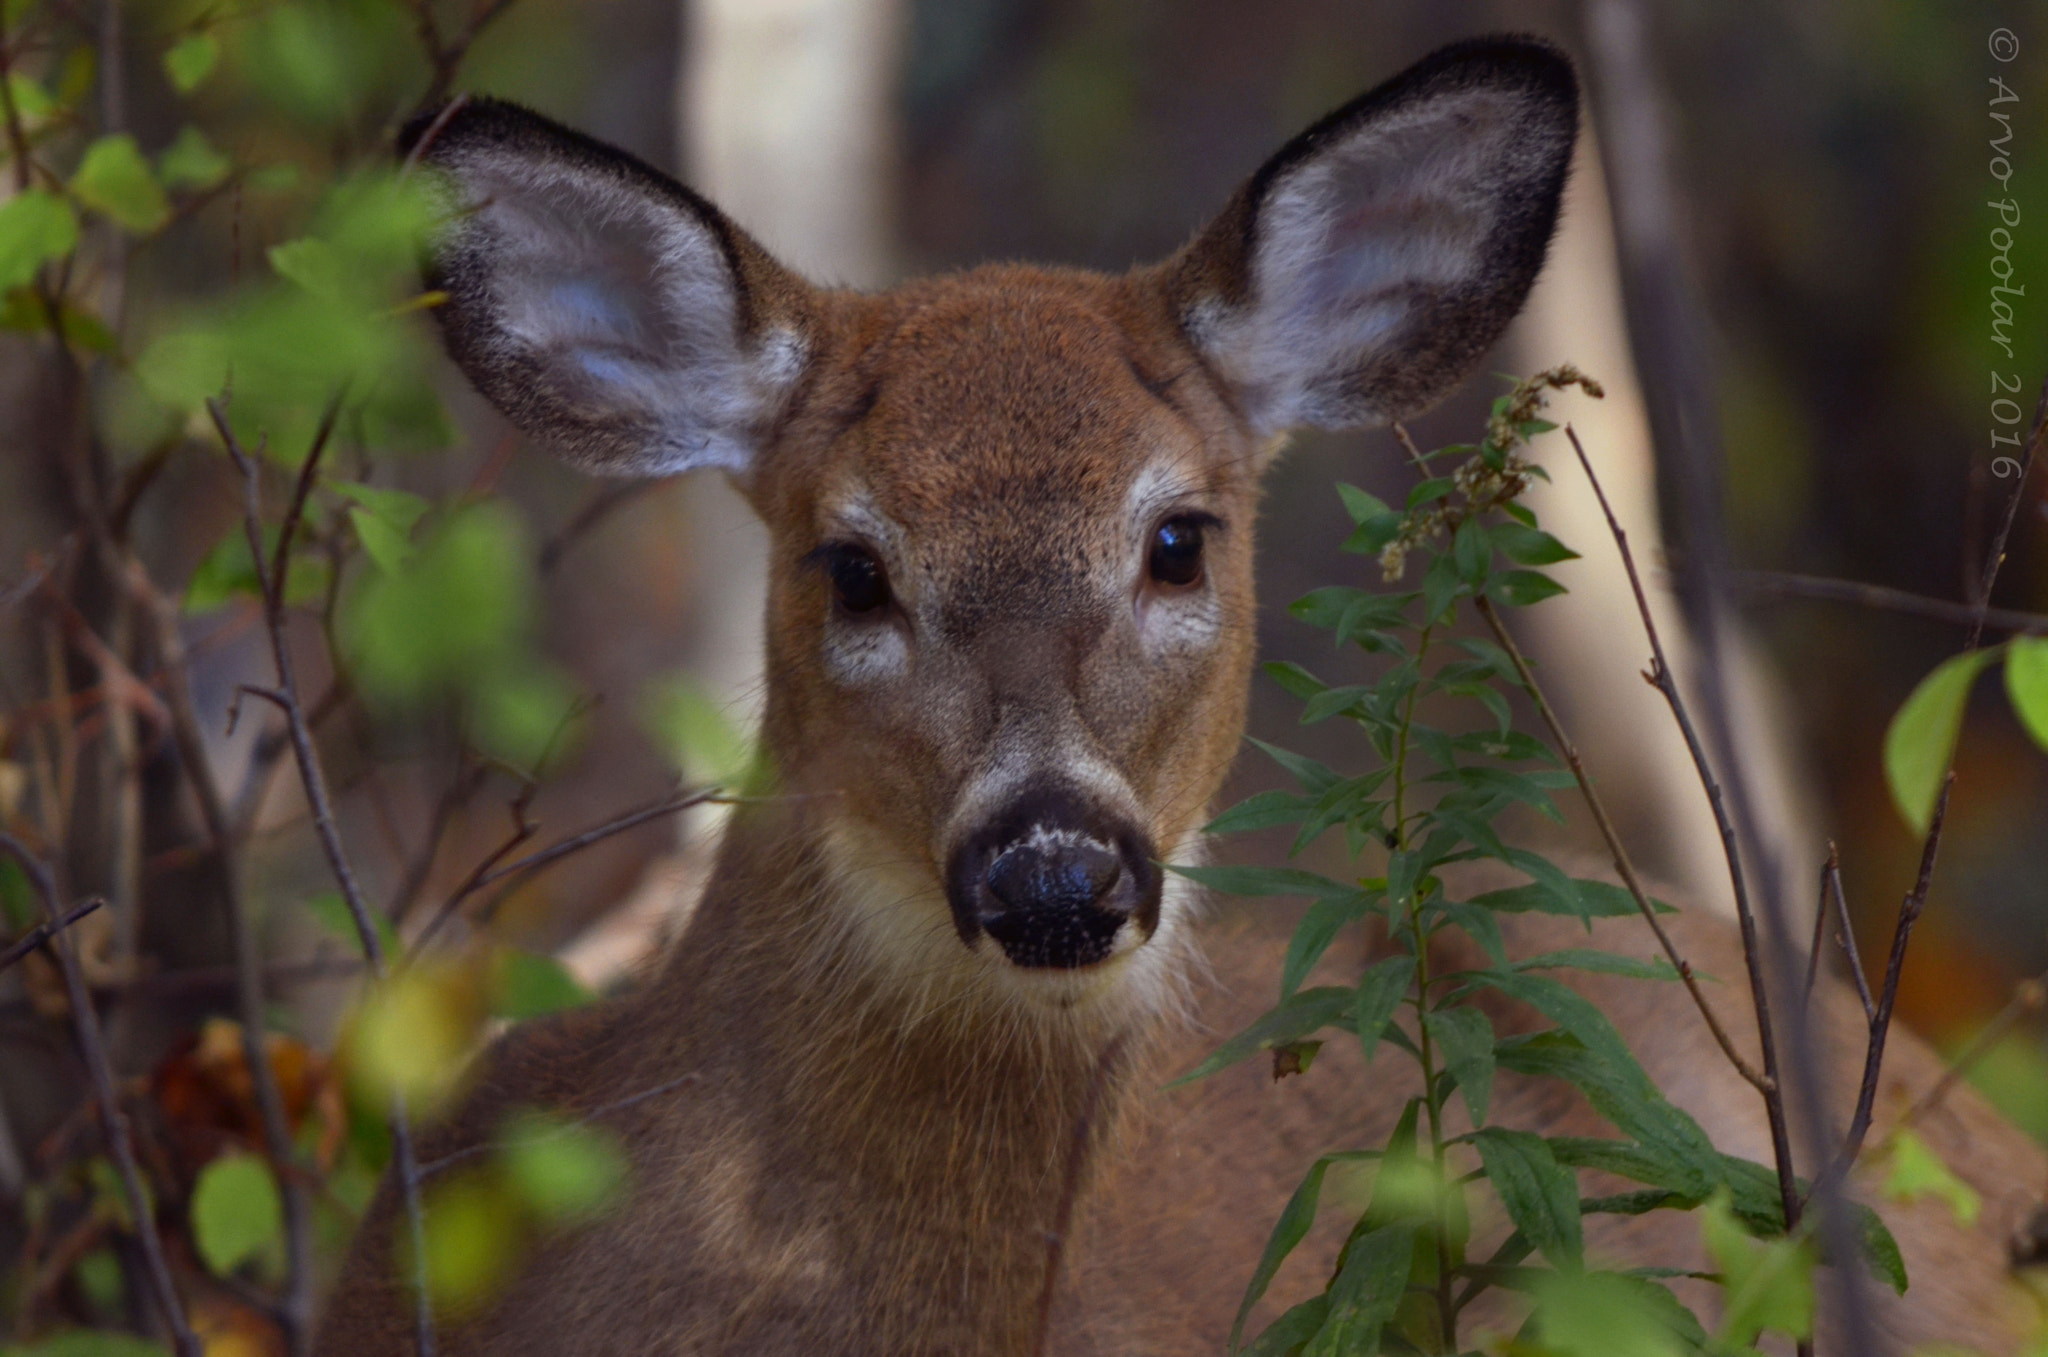 AF Zoom-Nikkor 35-105mm f/3.5-4.5D sample photo. Young fawn in the forest photography